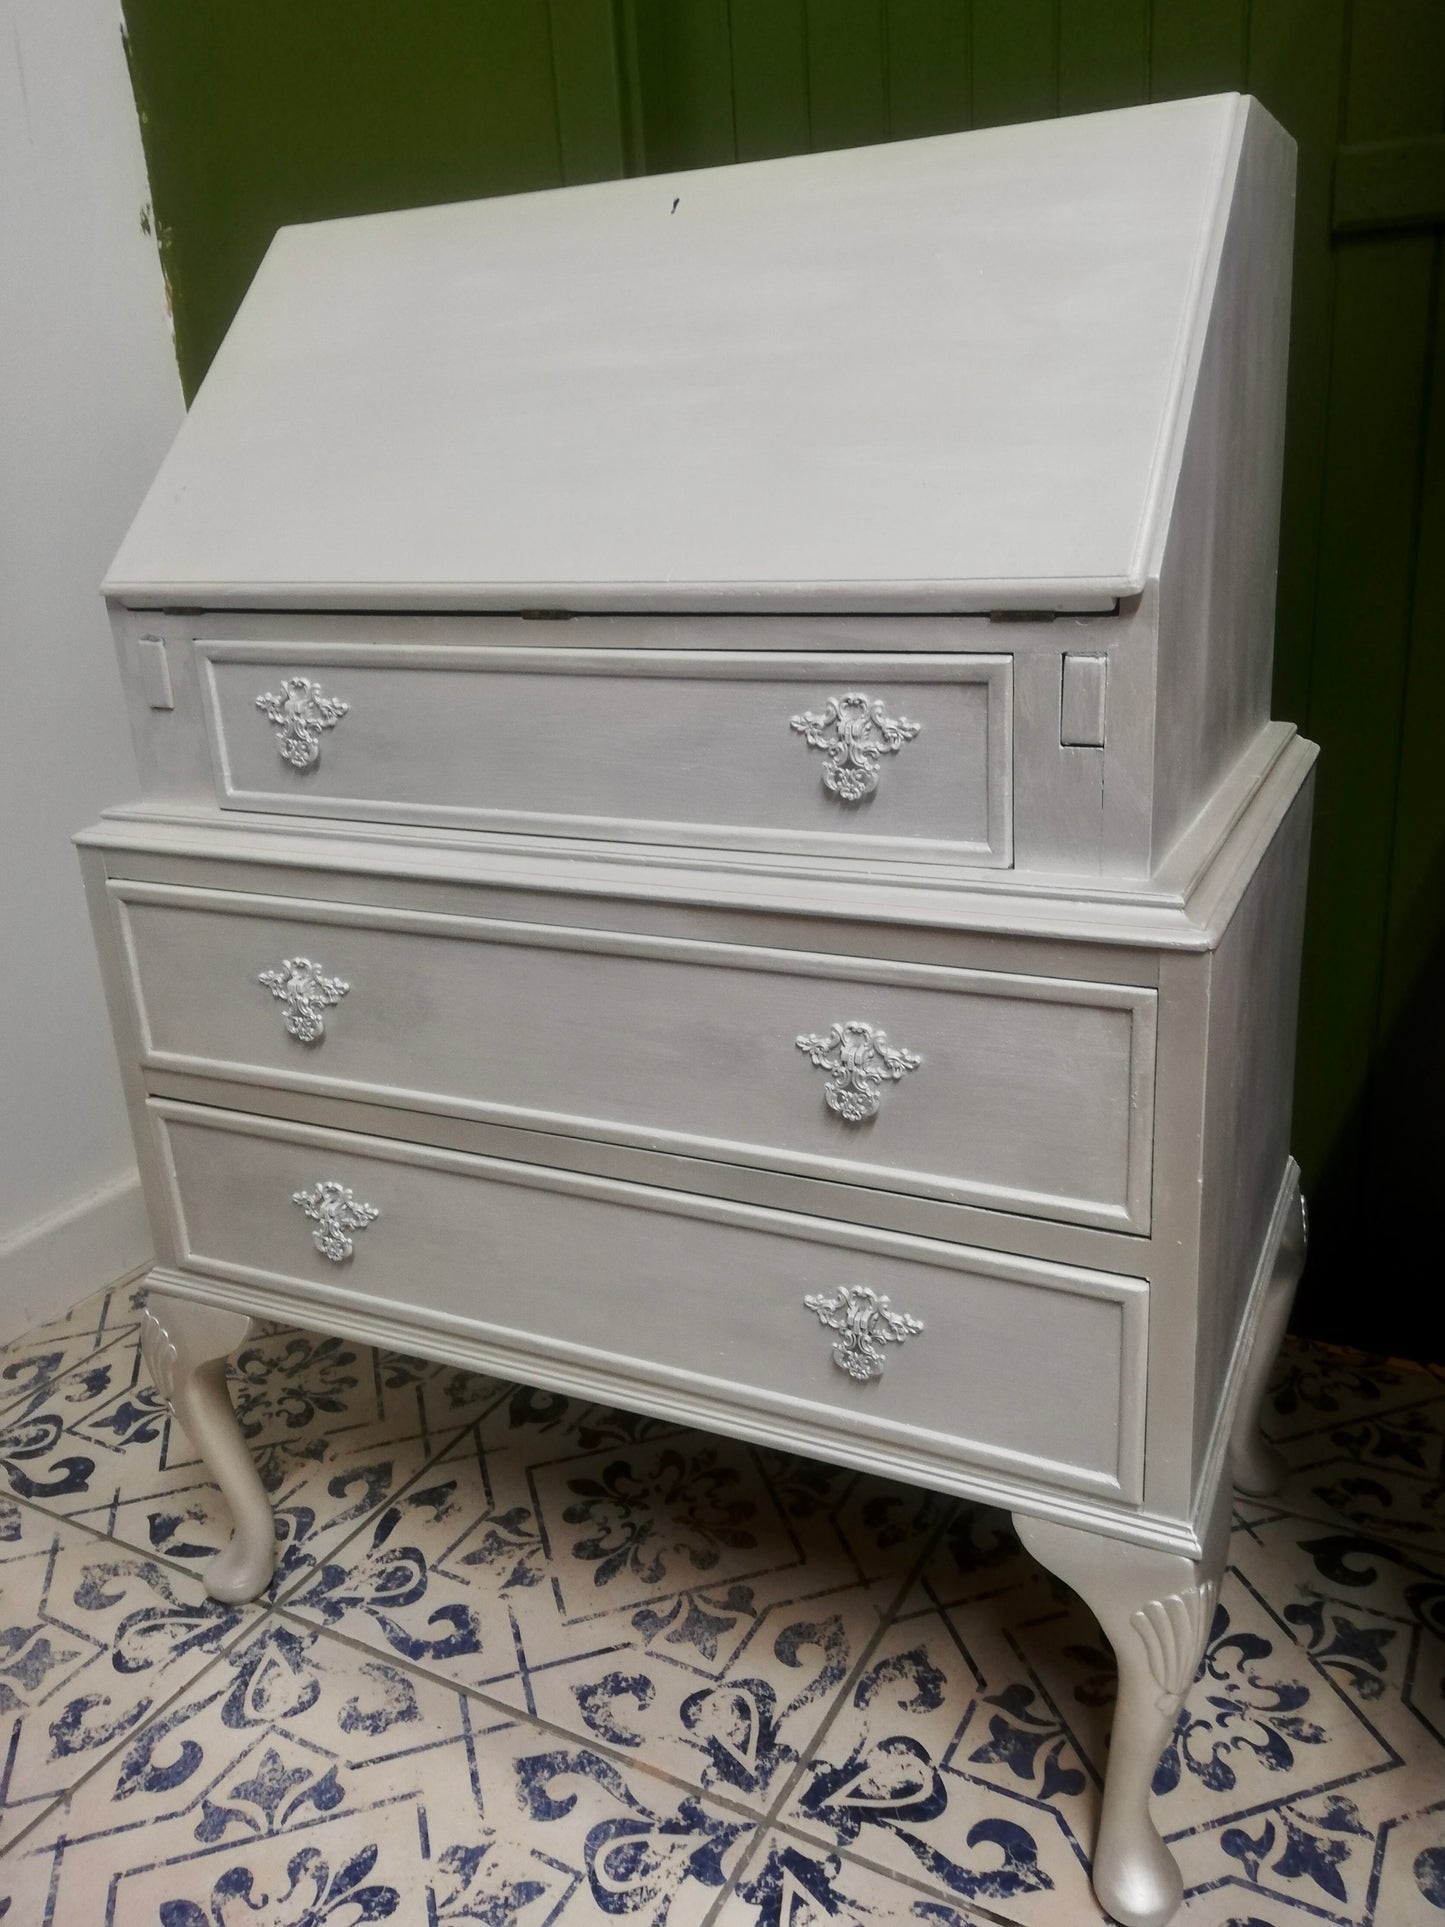 Vintage writing bureau available for painting